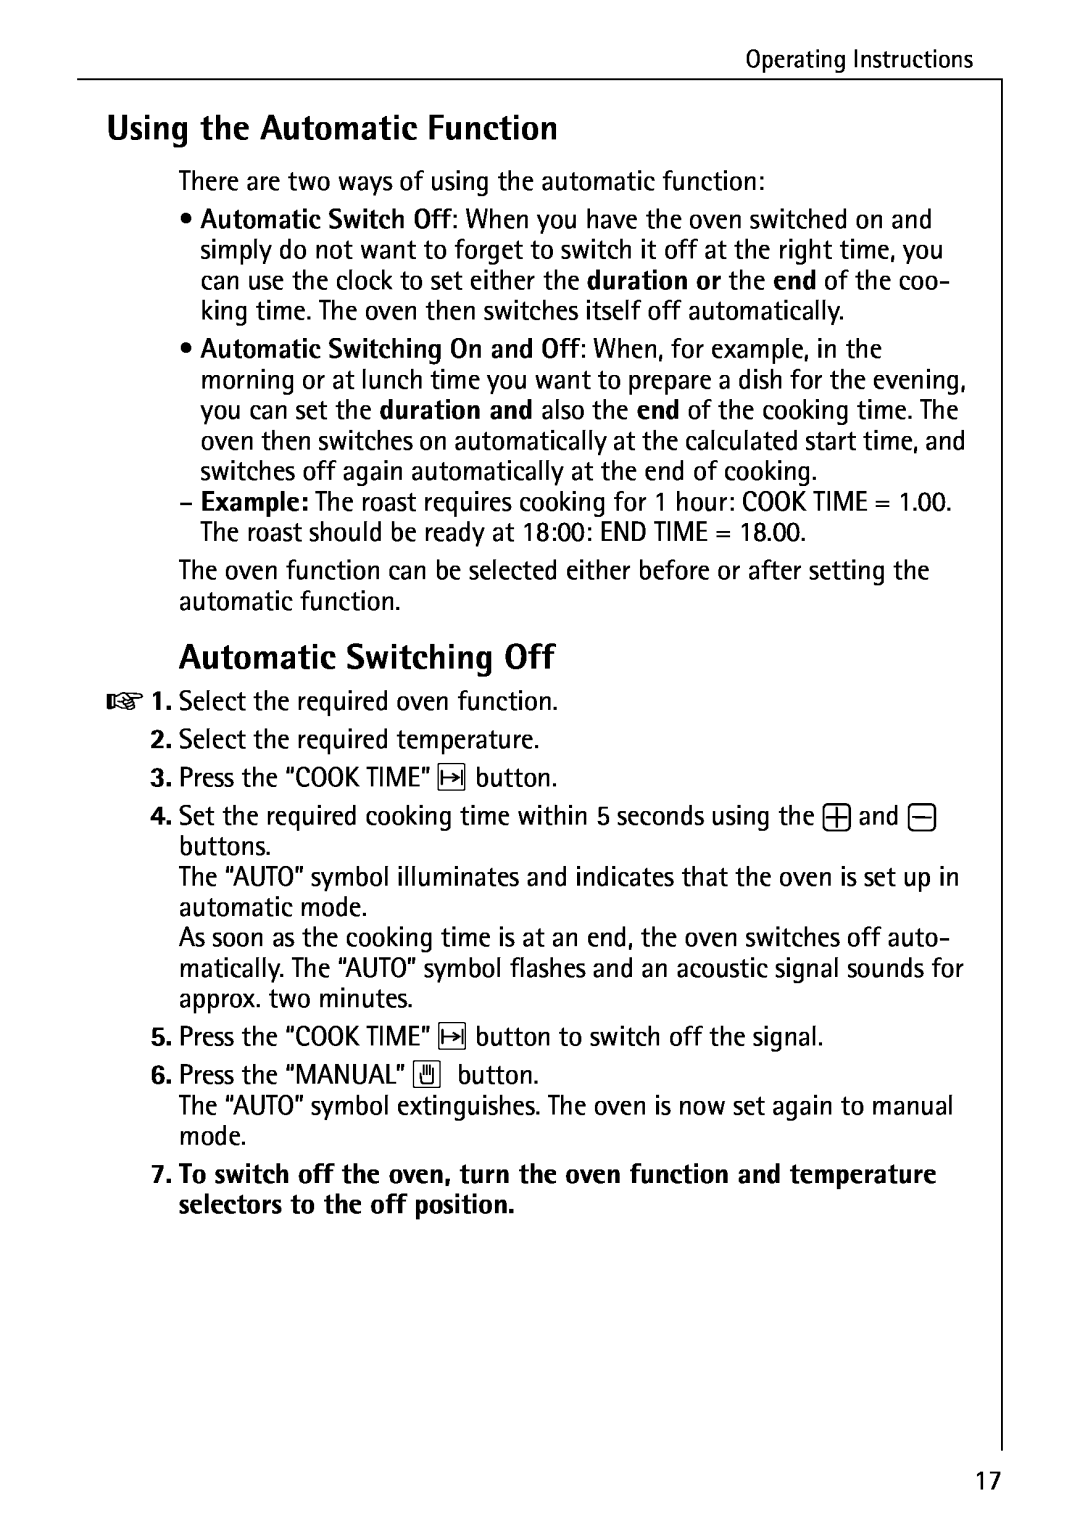 AEG B 2100 operating instructions Using the Automatic Function, Automatic Switching Off 